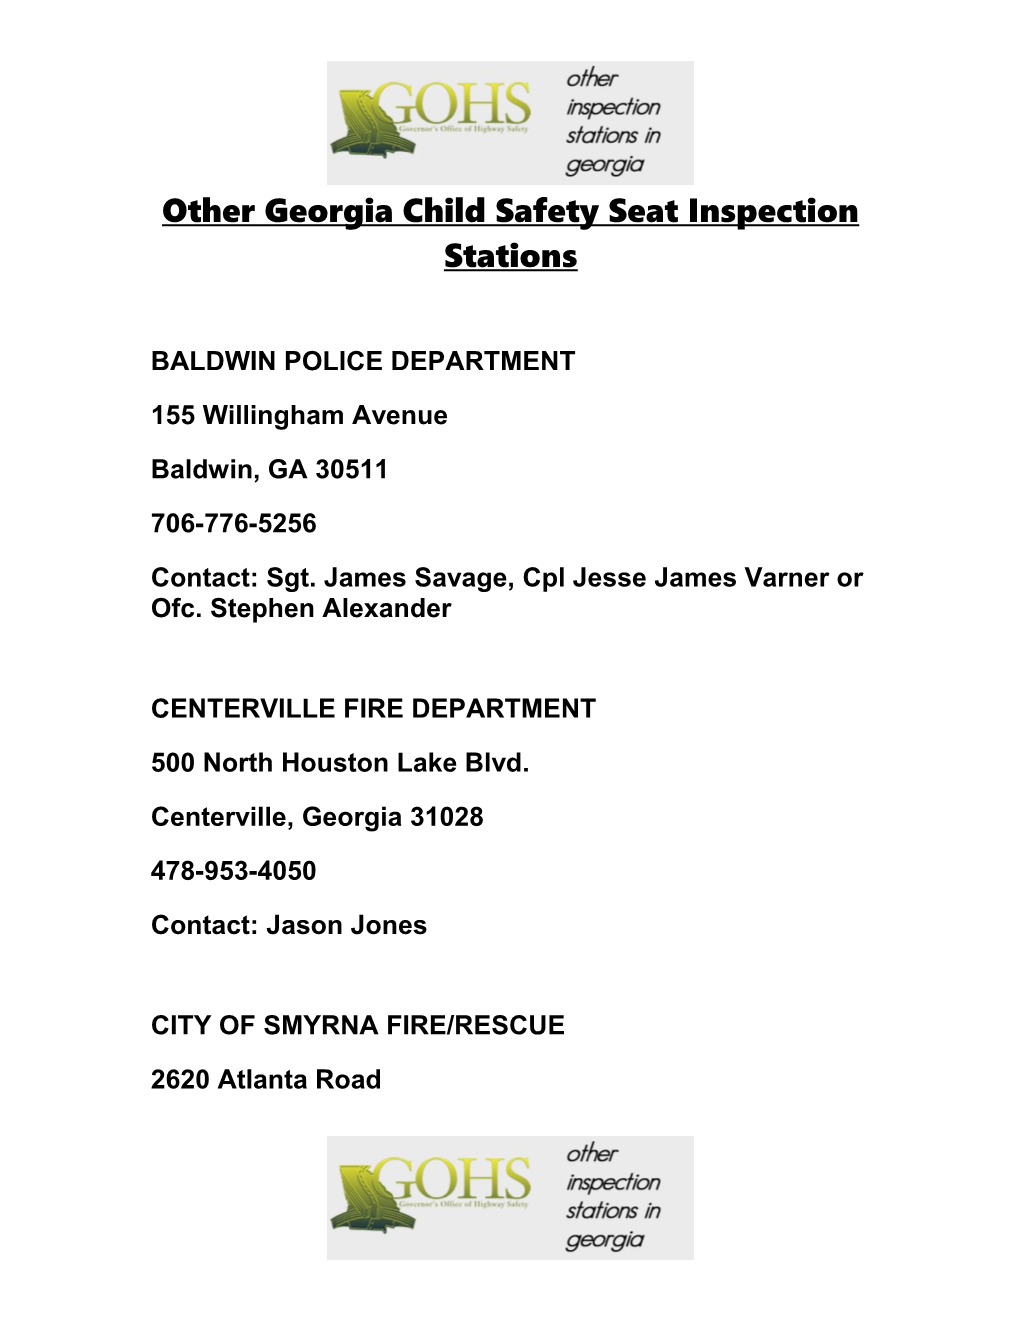 Other Georgia Child Safety Seat Inspection Stations